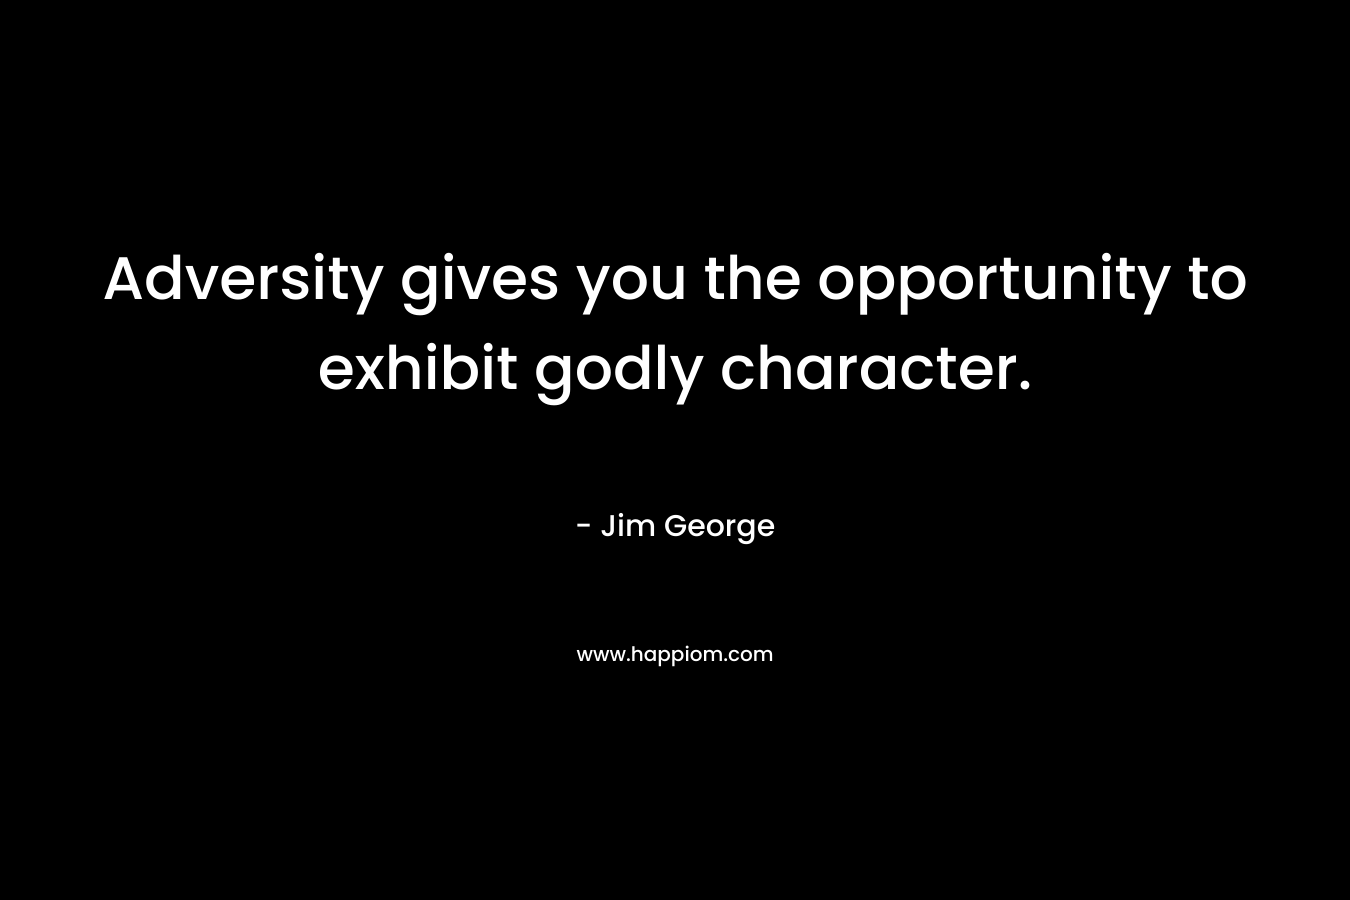 Adversity gives you the opportunity to exhibit godly character.